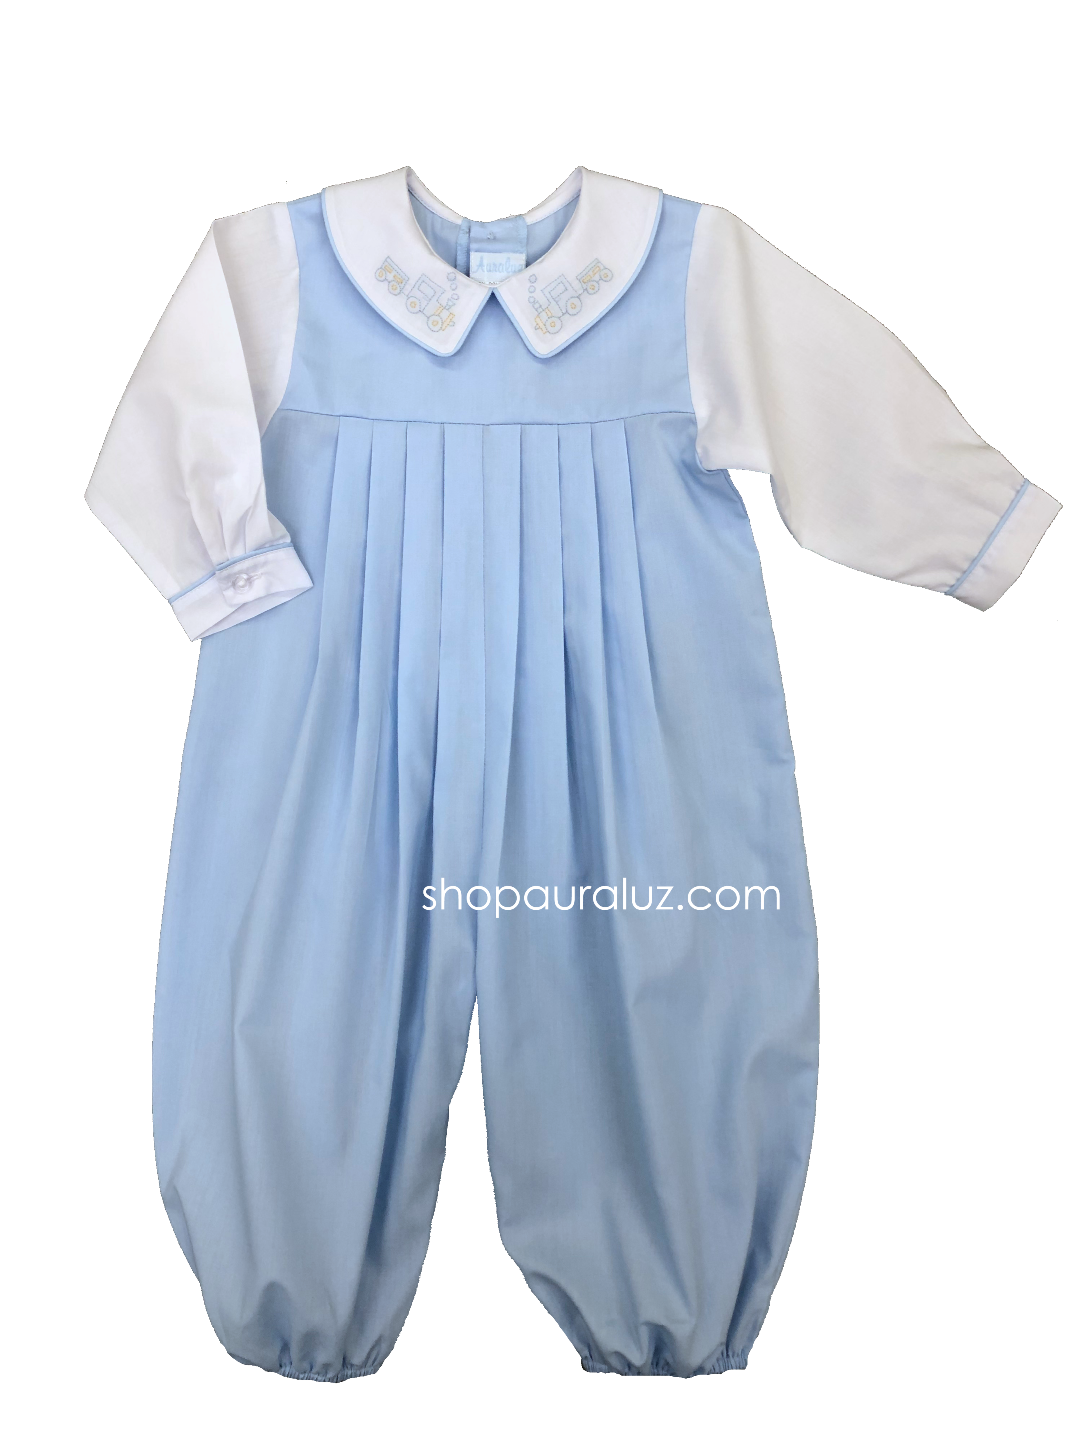 Auraluz Boy Bubble...Blue w/white long sleeves and boy collar with embroidered train